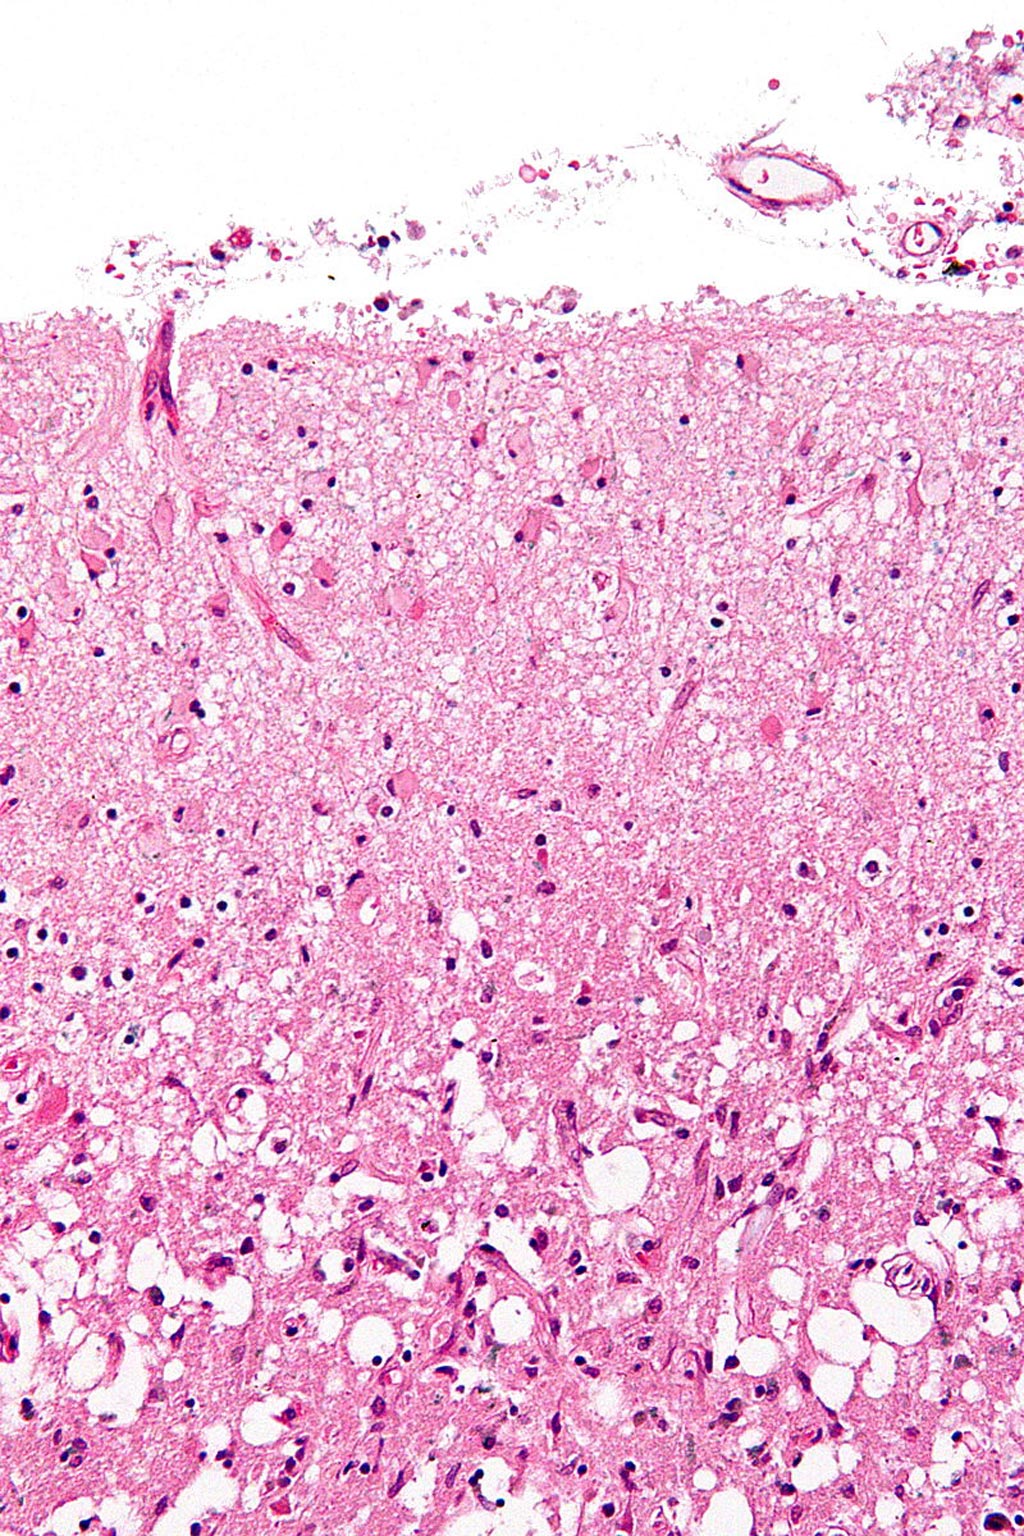 Image: A micrograph of the superficial cerebral cortex showing neuron loss and reactive astrocytes in a person that has had a stroke (Photo courtesy of Wikimedia Commons).